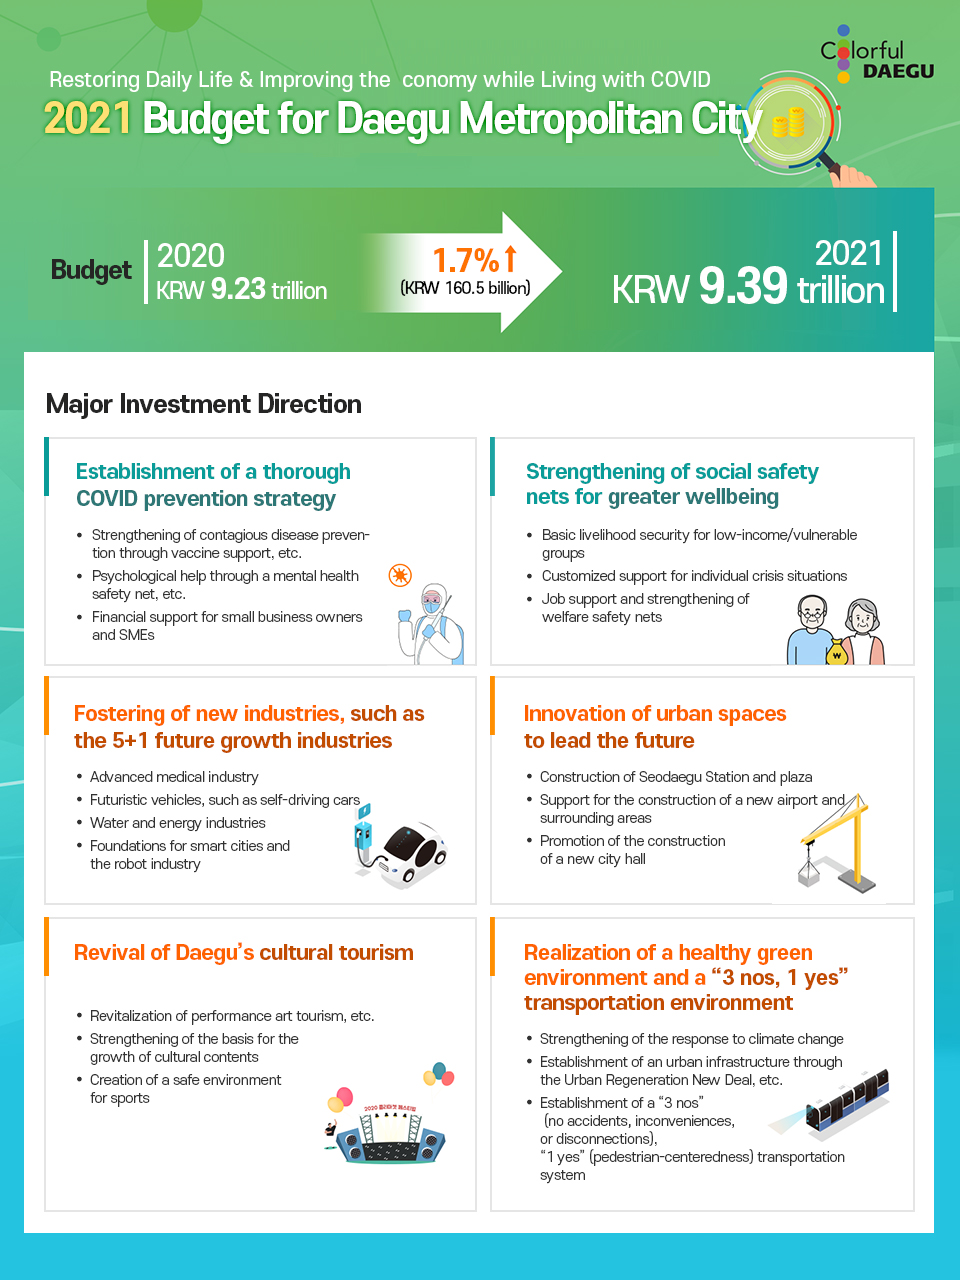 
Restoring Daily Life & Improving the Economy while Living with COVID
2021 Budget for Daegu Metropolitan City

Budget: 2020 KRW 9.23 trillion
1.7% ↑ (KRW 160.5 billion)
2021 KRW 9.39 trillion

○ Major Investment Direction
Establishment of a thorough COVID prevention strategy
Strengthening of contagious disease prevention through vaccine support, etc.
Psychological help through a mental health safety net, etc.
Financial support for small business owners and SMEs

Fostering of new industries, such as the 5+1 future growth industries
Advanced medical industry 
Futuristic vehicles, such as self-driving cars
Water and energy industries
Foundations for smart cities and the robot industry

Revival of Daegu’s cultural tourism
Revitalization of performance art tourism, etc.
Strengthening of the basis for the growth of cultural contents
Creation of a safe environment for sports

Strengthening of social safety nets for greater wellbeing
Basic livelihood security for low-income/vulnerable groups
Customized support for individual crisis situations 
Job support and strengthening of welfare safety nets

Innovation of urban spaces to lead the future
Construction of Seodaegu Station and plaza
Support for the construction of a new airport and surrounding areas
Promotion of the construction of a new city hall

Realization of a healthy green environment and a '3 nos, 1 yes' transportation environment
Strengthening of the response to climate change
Establishment of an urban infrastructure through the Urban Regeneration New Deal, etc.
Establishment of a '3 nos' (no accidents, inconveniences, or disconnections), '1 yes' (pedestrian-centeredness) transportation system
 